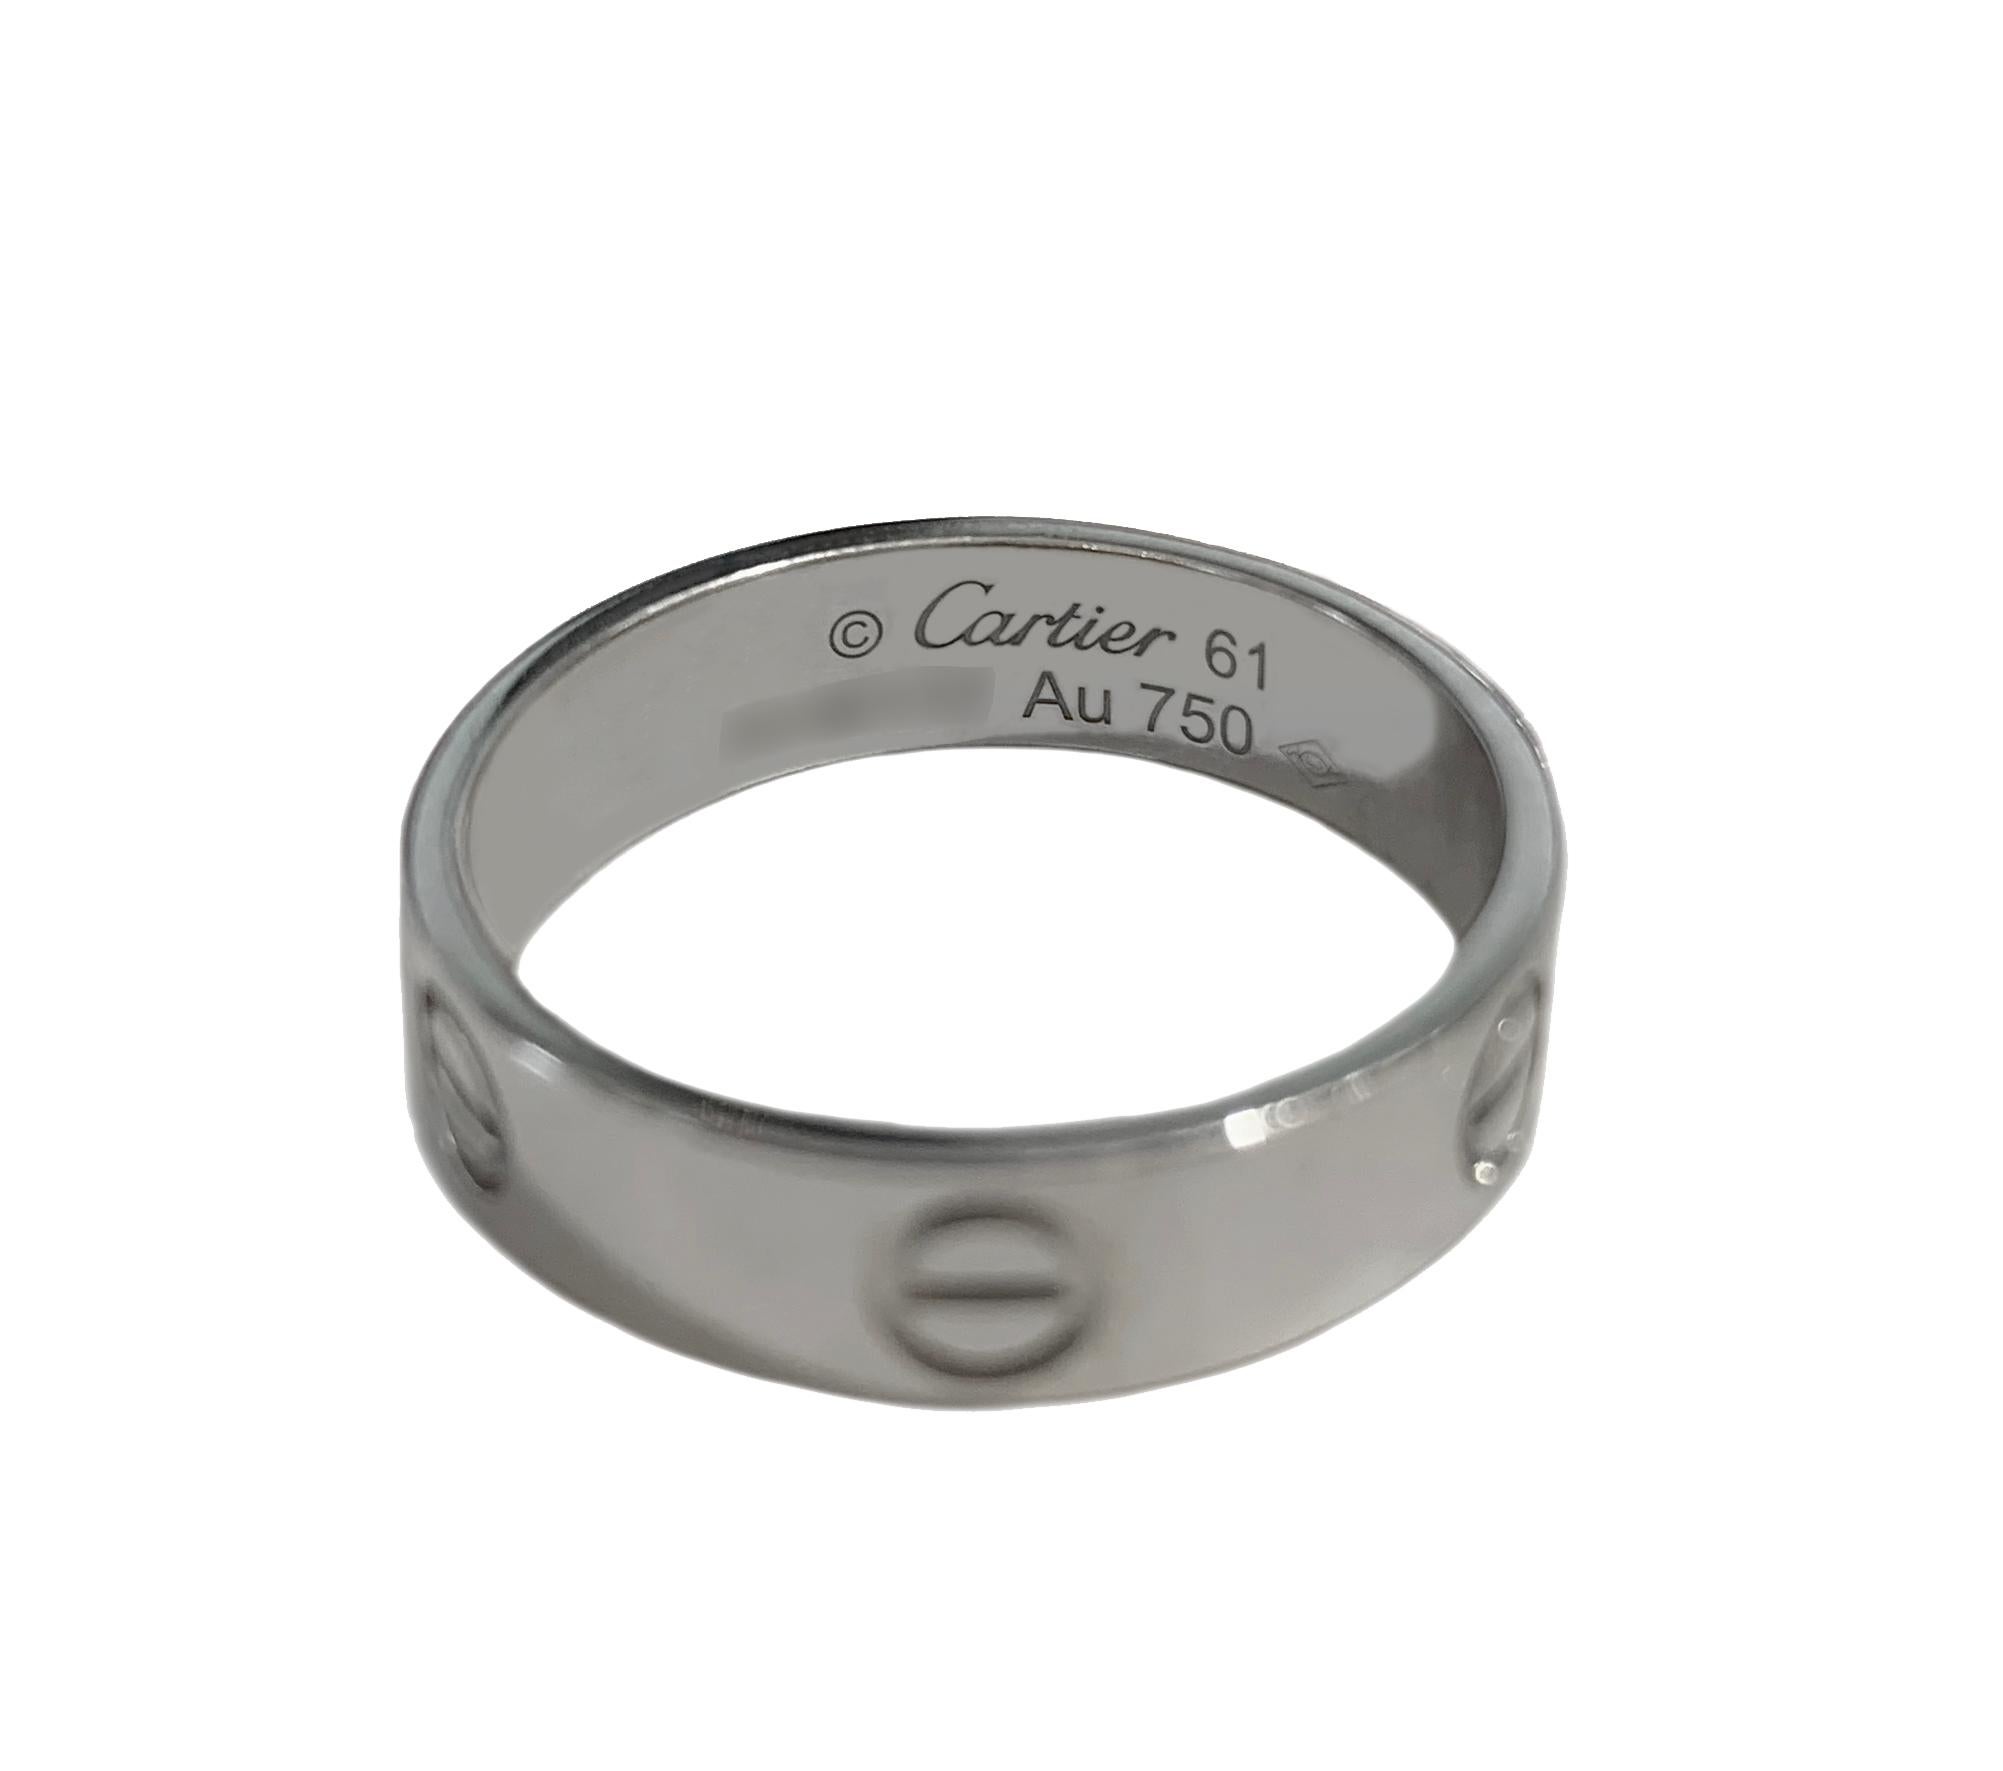 Mint condition
18 karat white gold
Ring size: 61/9.5
Width: 6mm
Comes with Cartier box, no papers